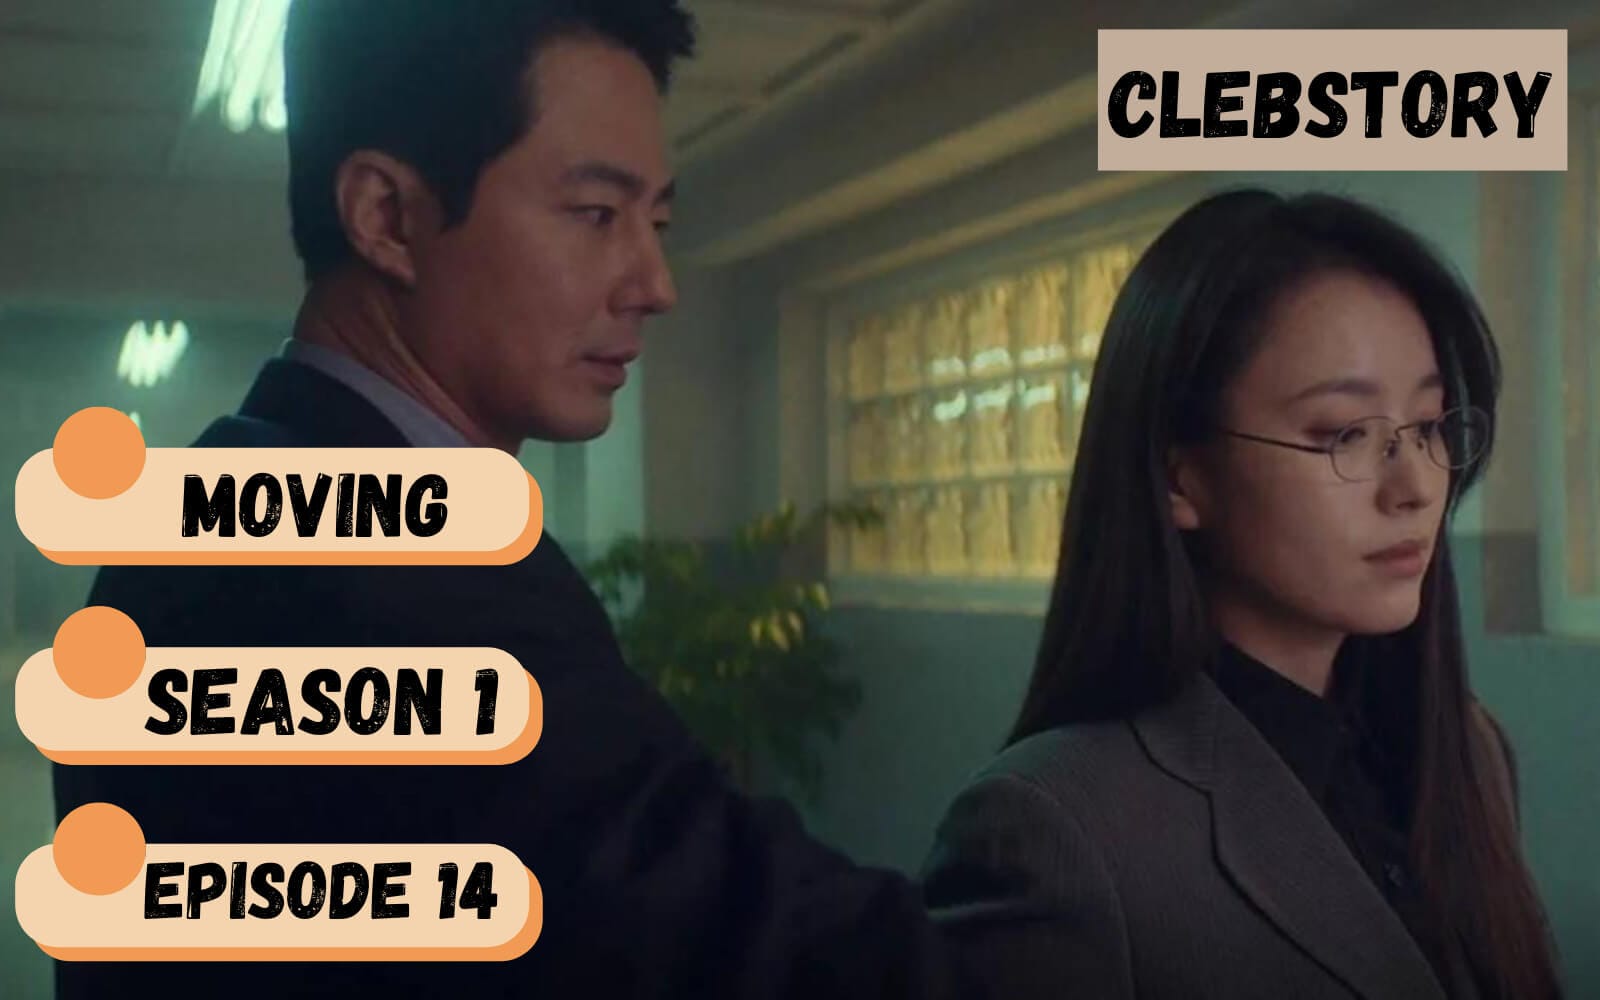 Moving Episode 14 Countdown